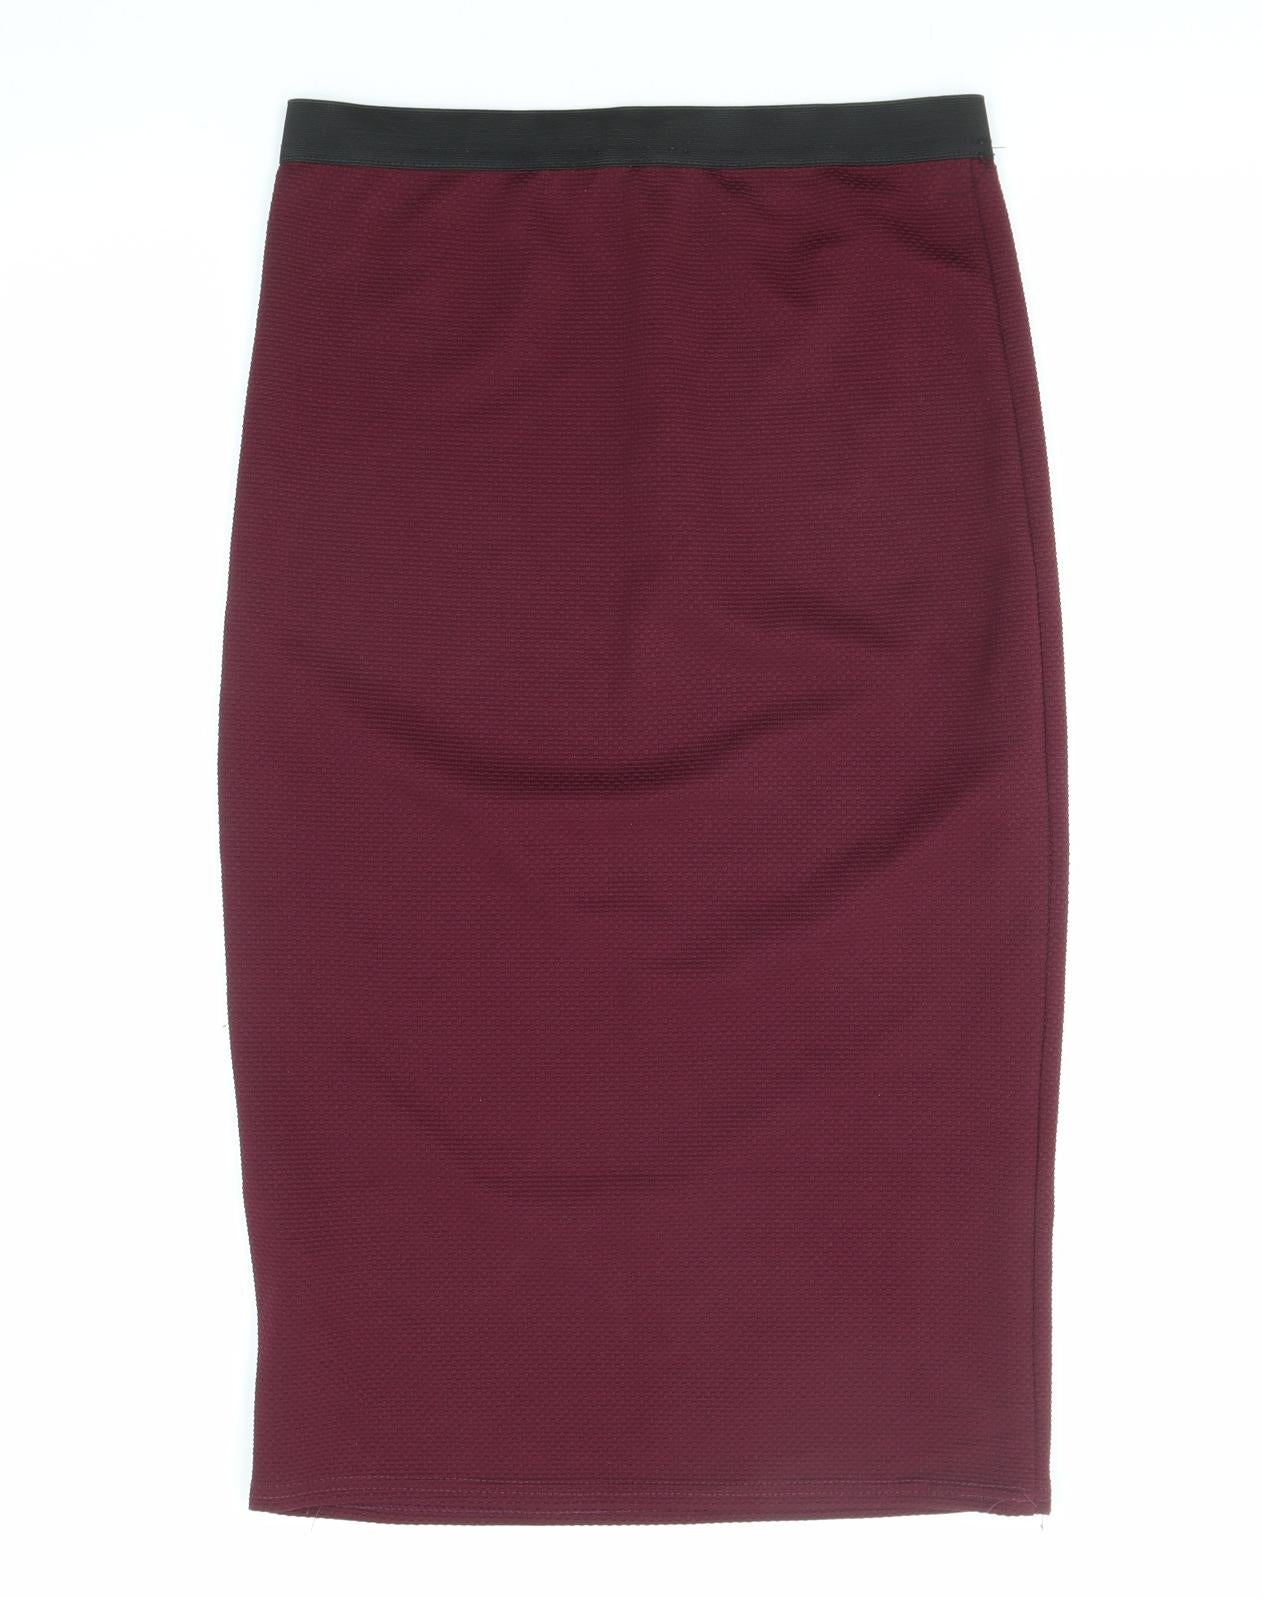 New Look Womens Purple Polyester Straight & Pencil Skirt Size 12